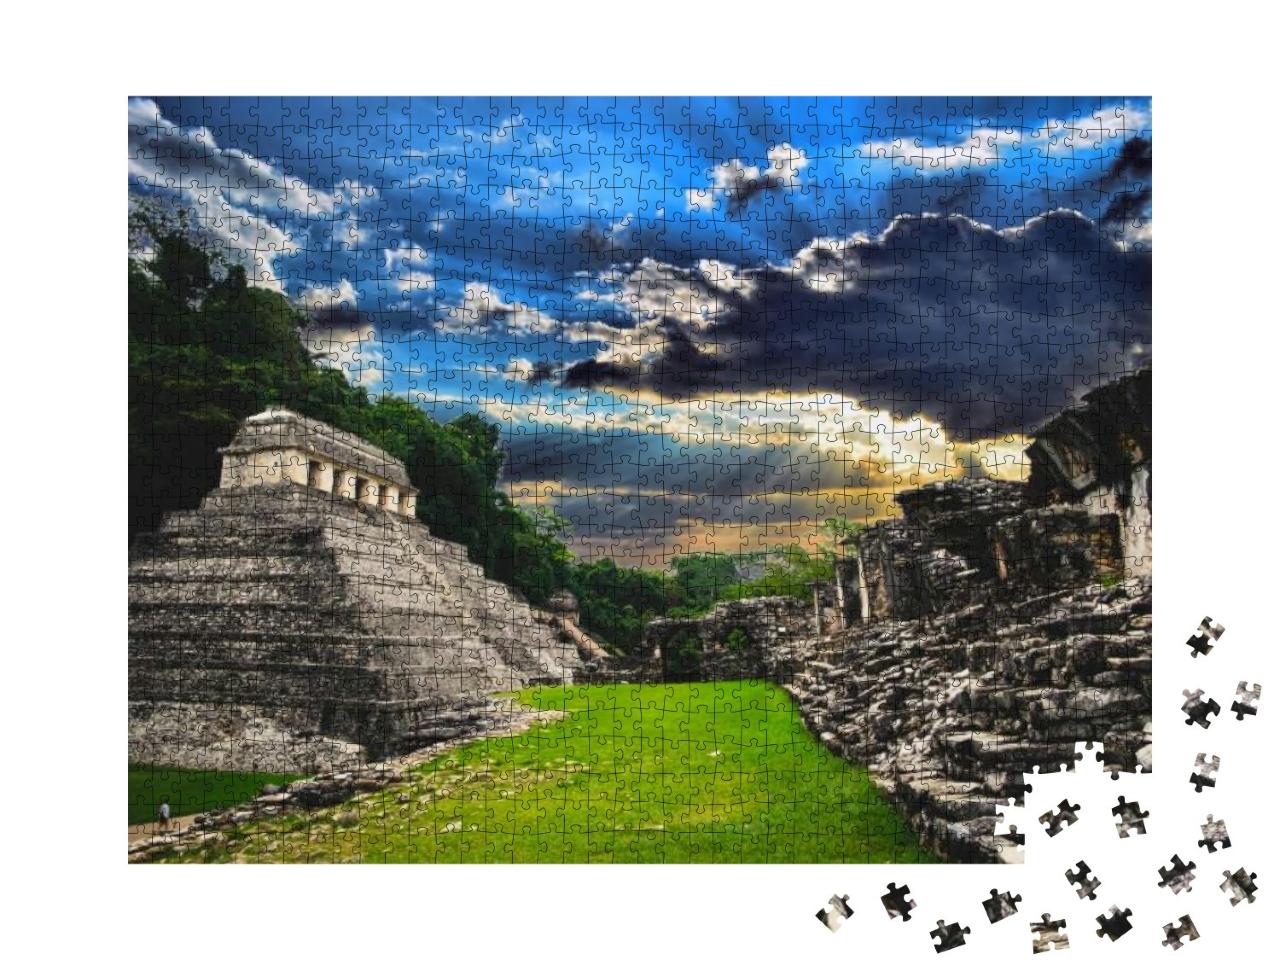 Mayan Ruins Palenque, Mexico... Jigsaw Puzzle with 1000 pieces